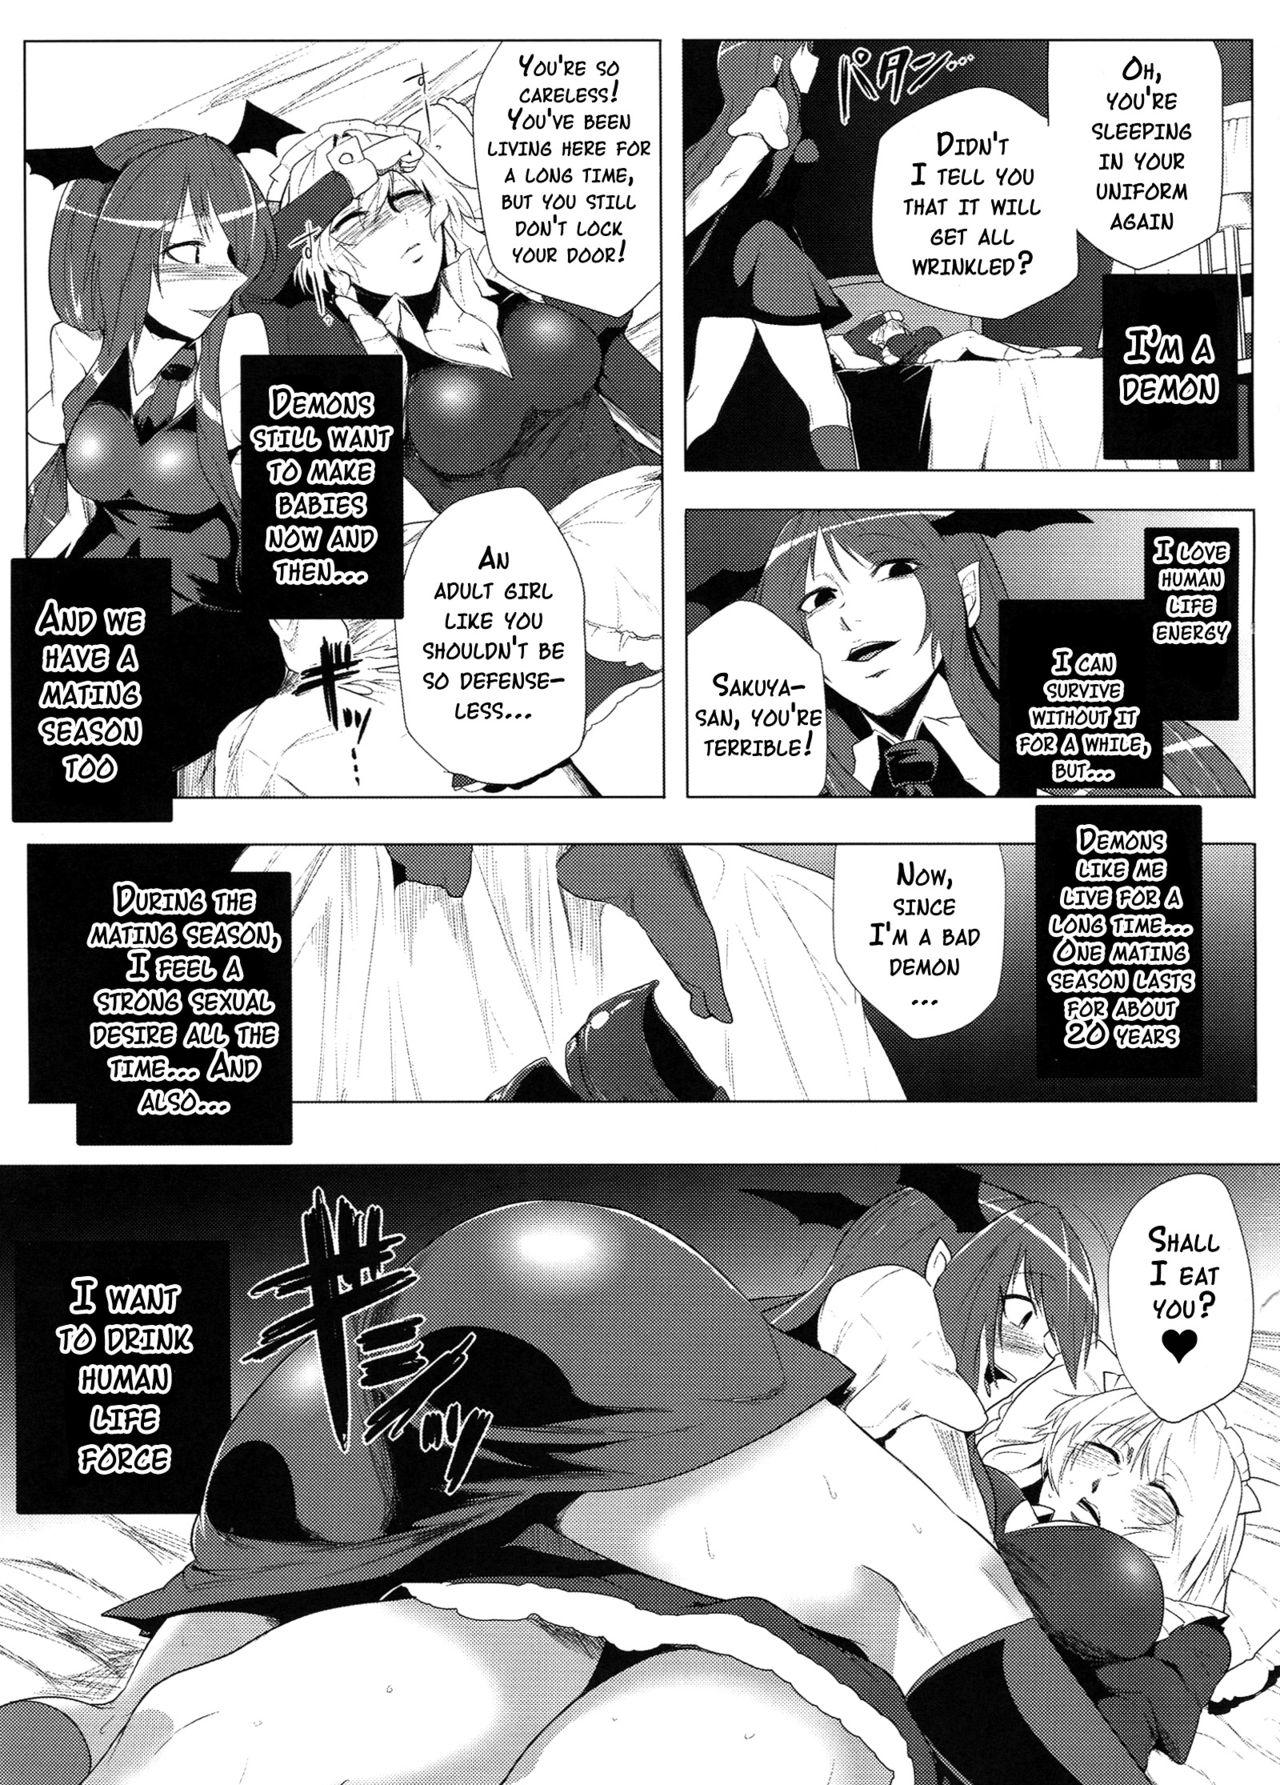 Booty THE BEGINNING OF THE END OF ETERNITY - Touhou project Prostituta - Page 8